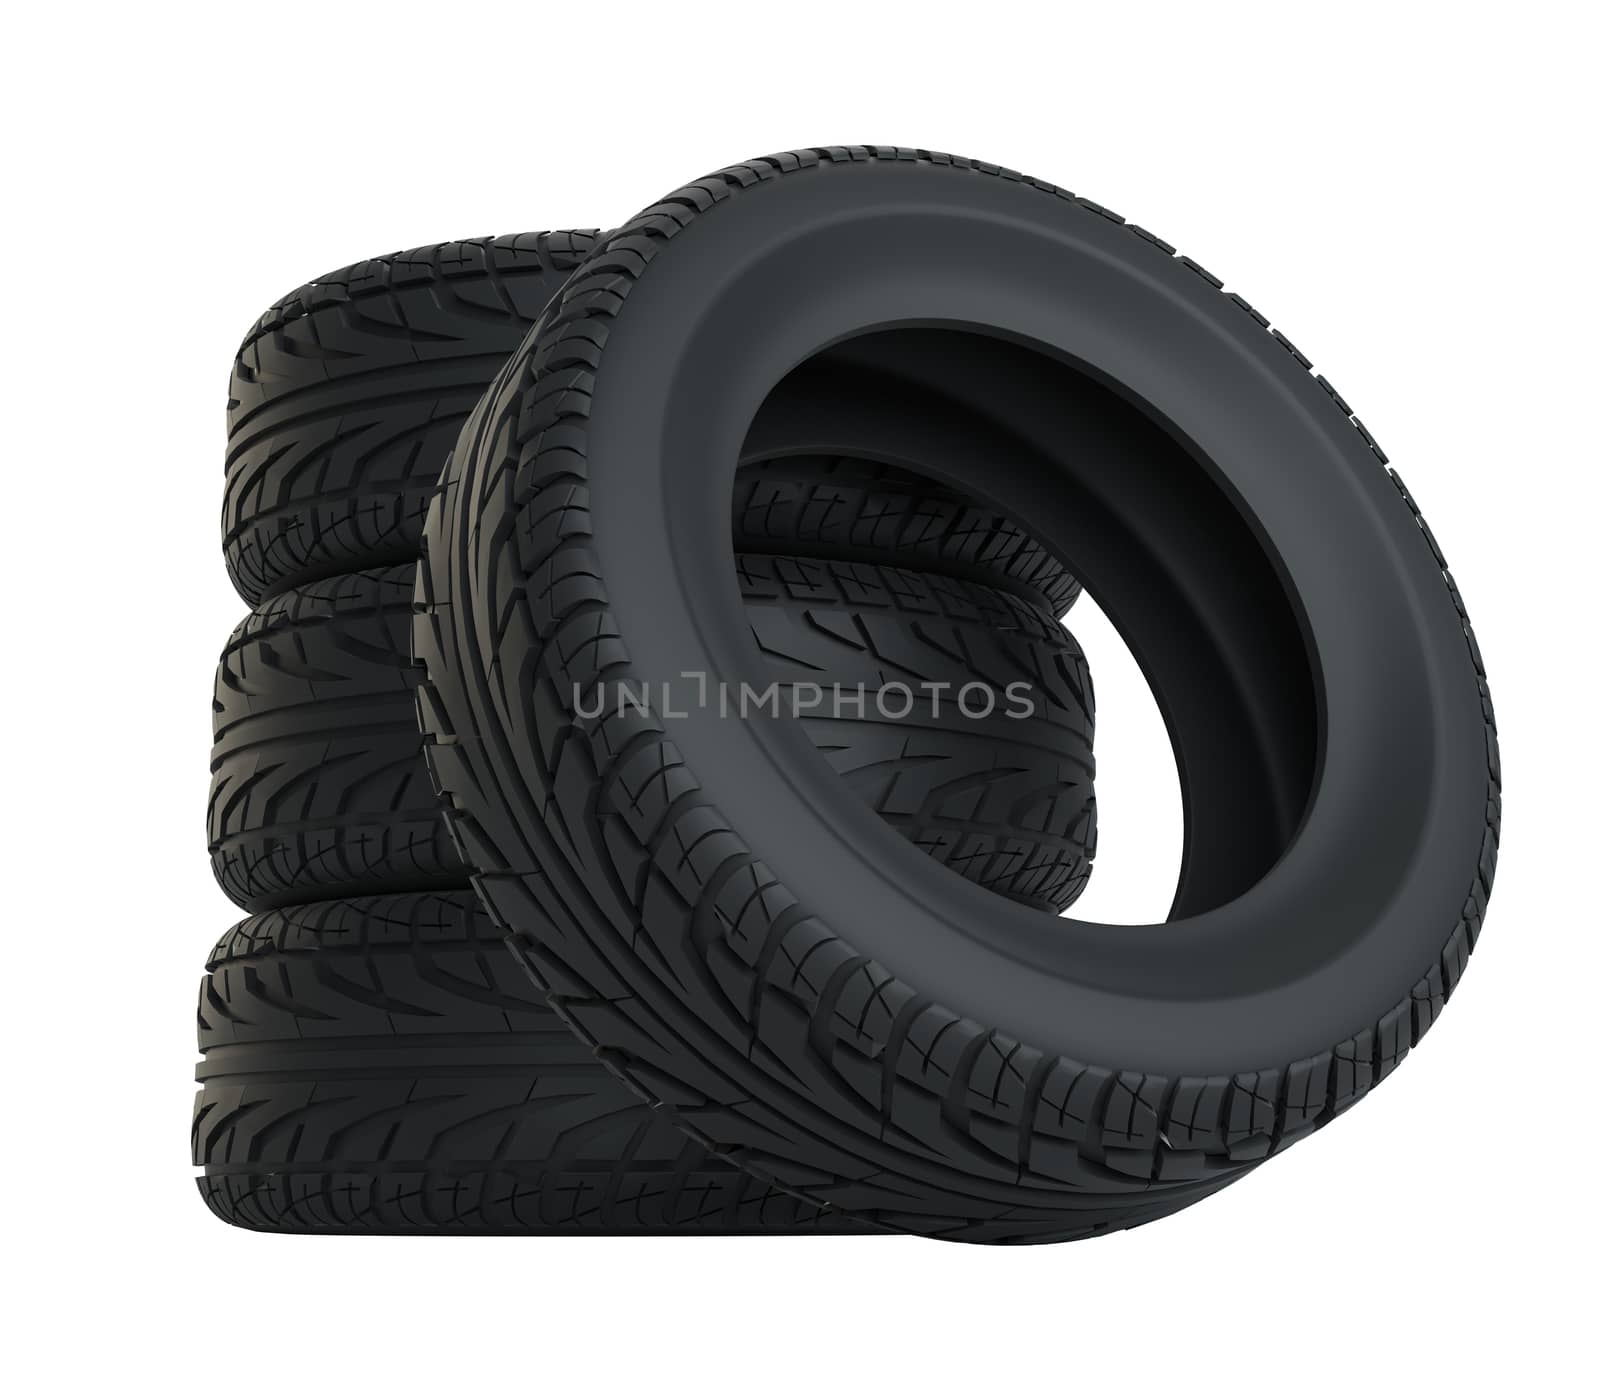 Car tires isolated on white. 3d illustration